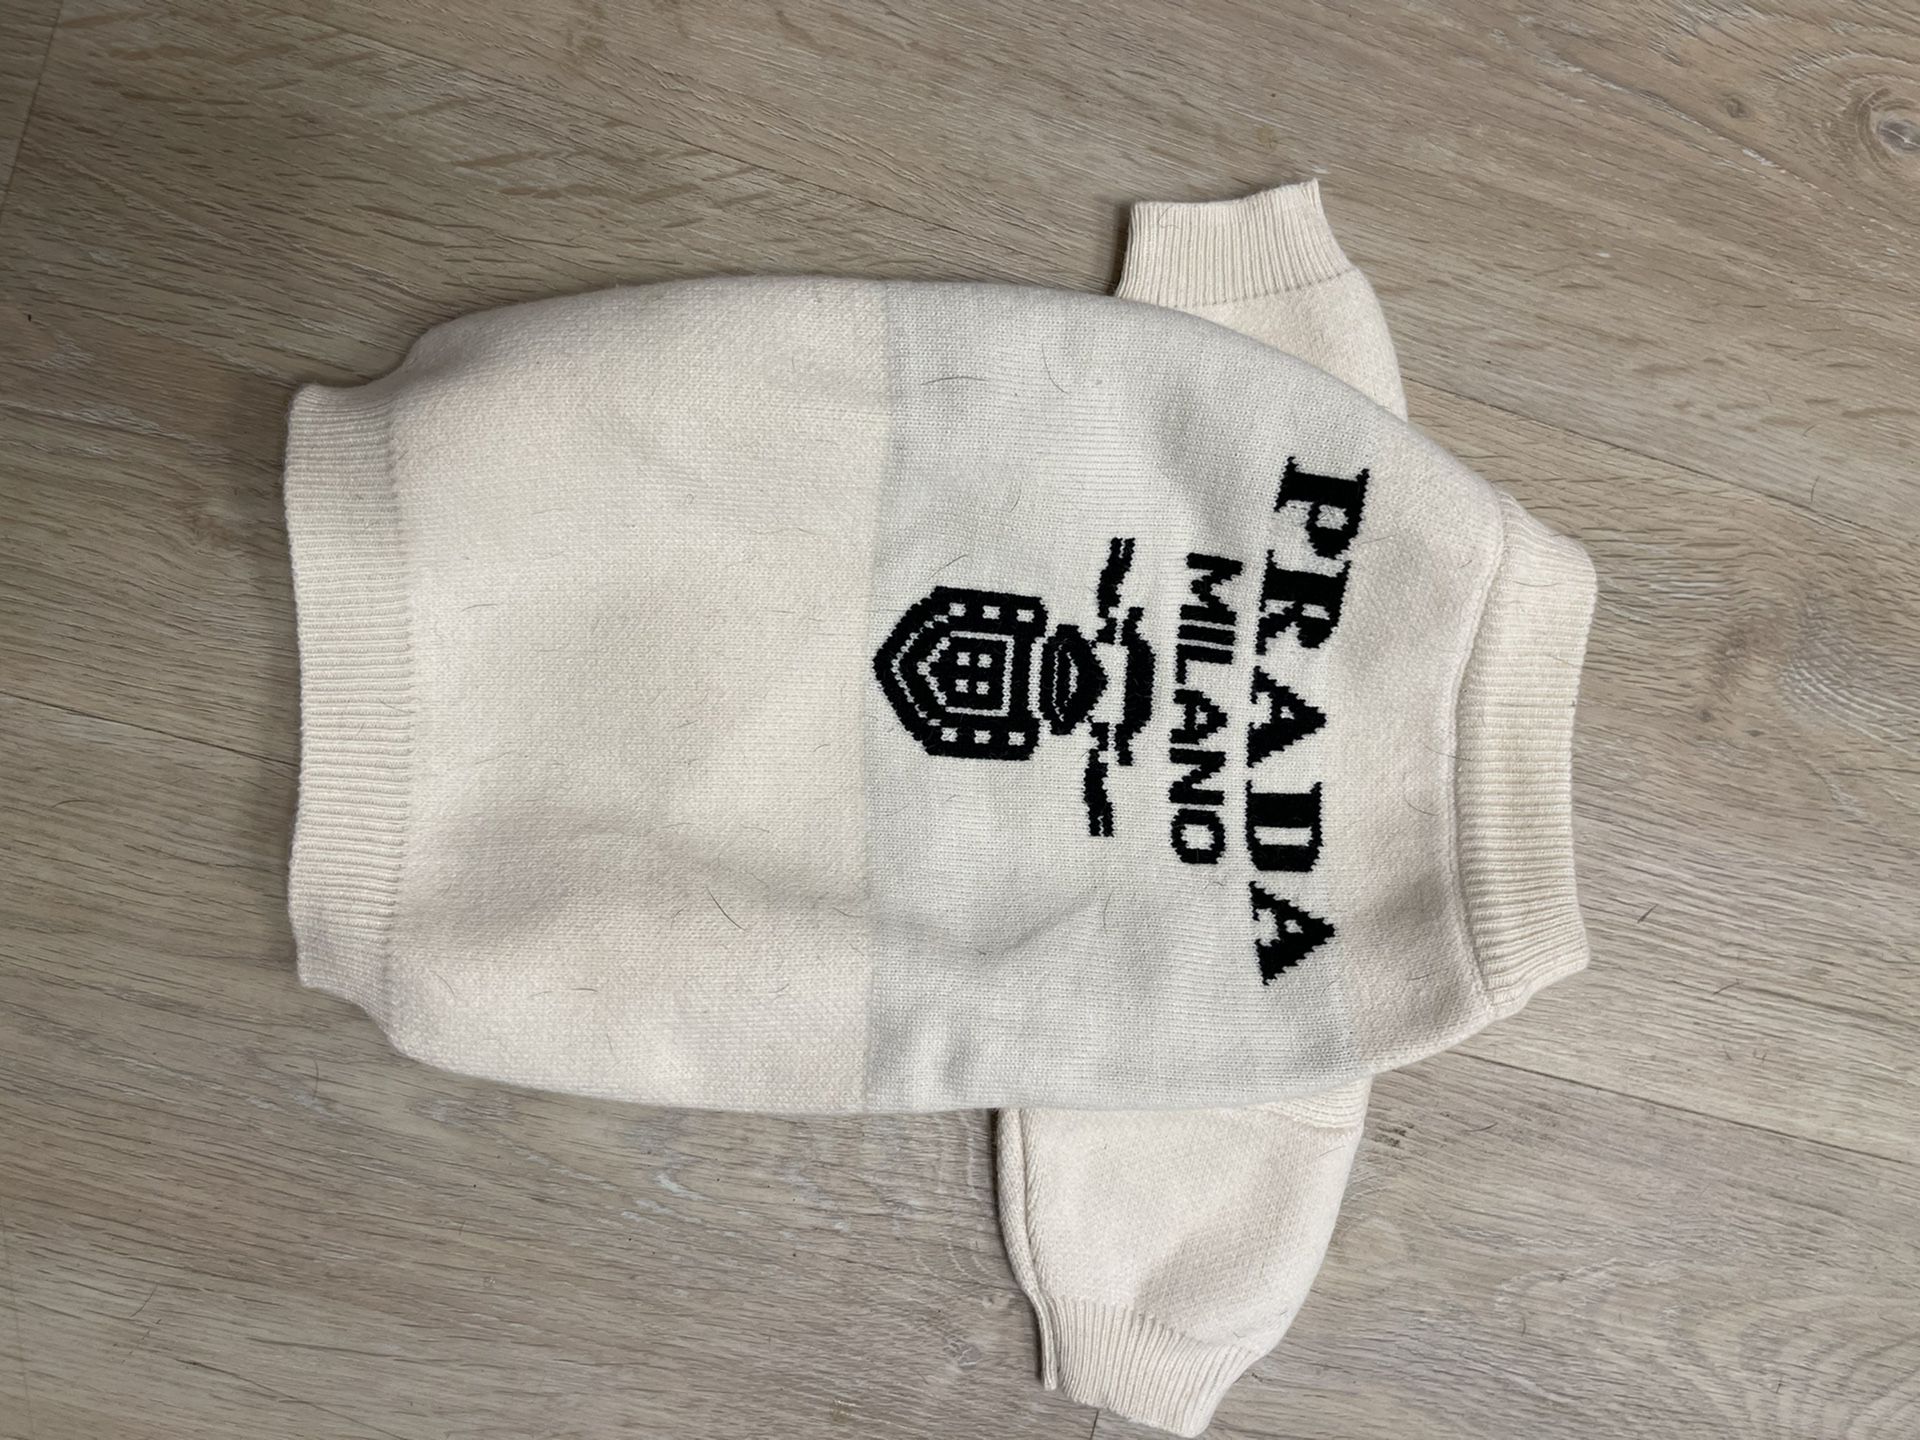 Prada Dog Sweater for Sale in Brooklyn, NY - OfferUp